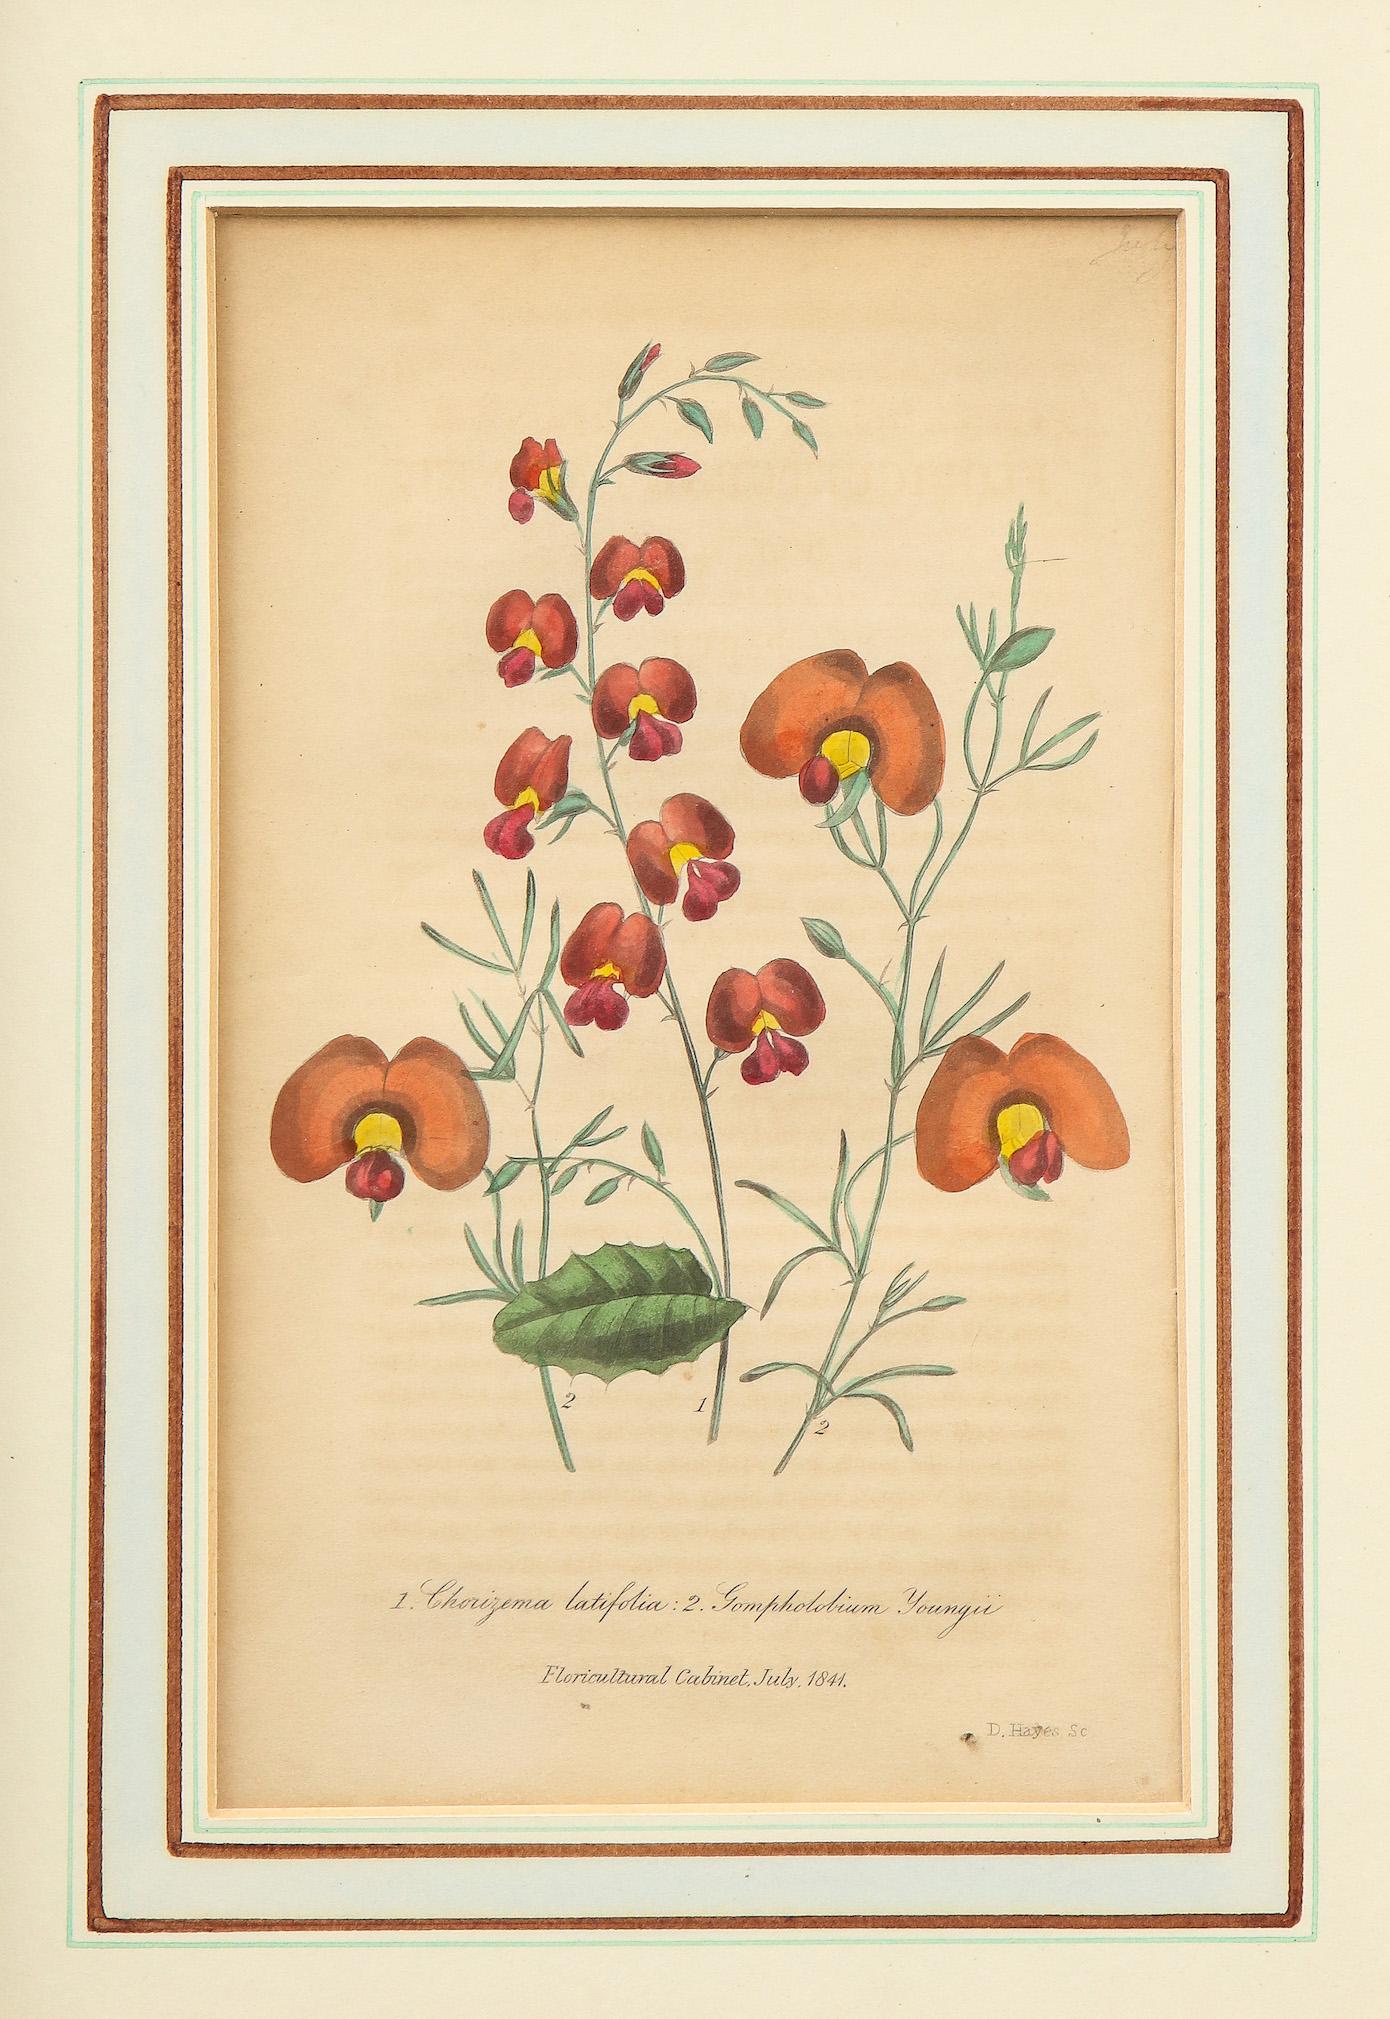 Founded by William Curtis in 1787, Curtis's Botanical Magazine is the longest continuously published botanical magazine still in print. Curtis was an apothecary and botanist who held a position at Kew Gardens. The publication familiarized its